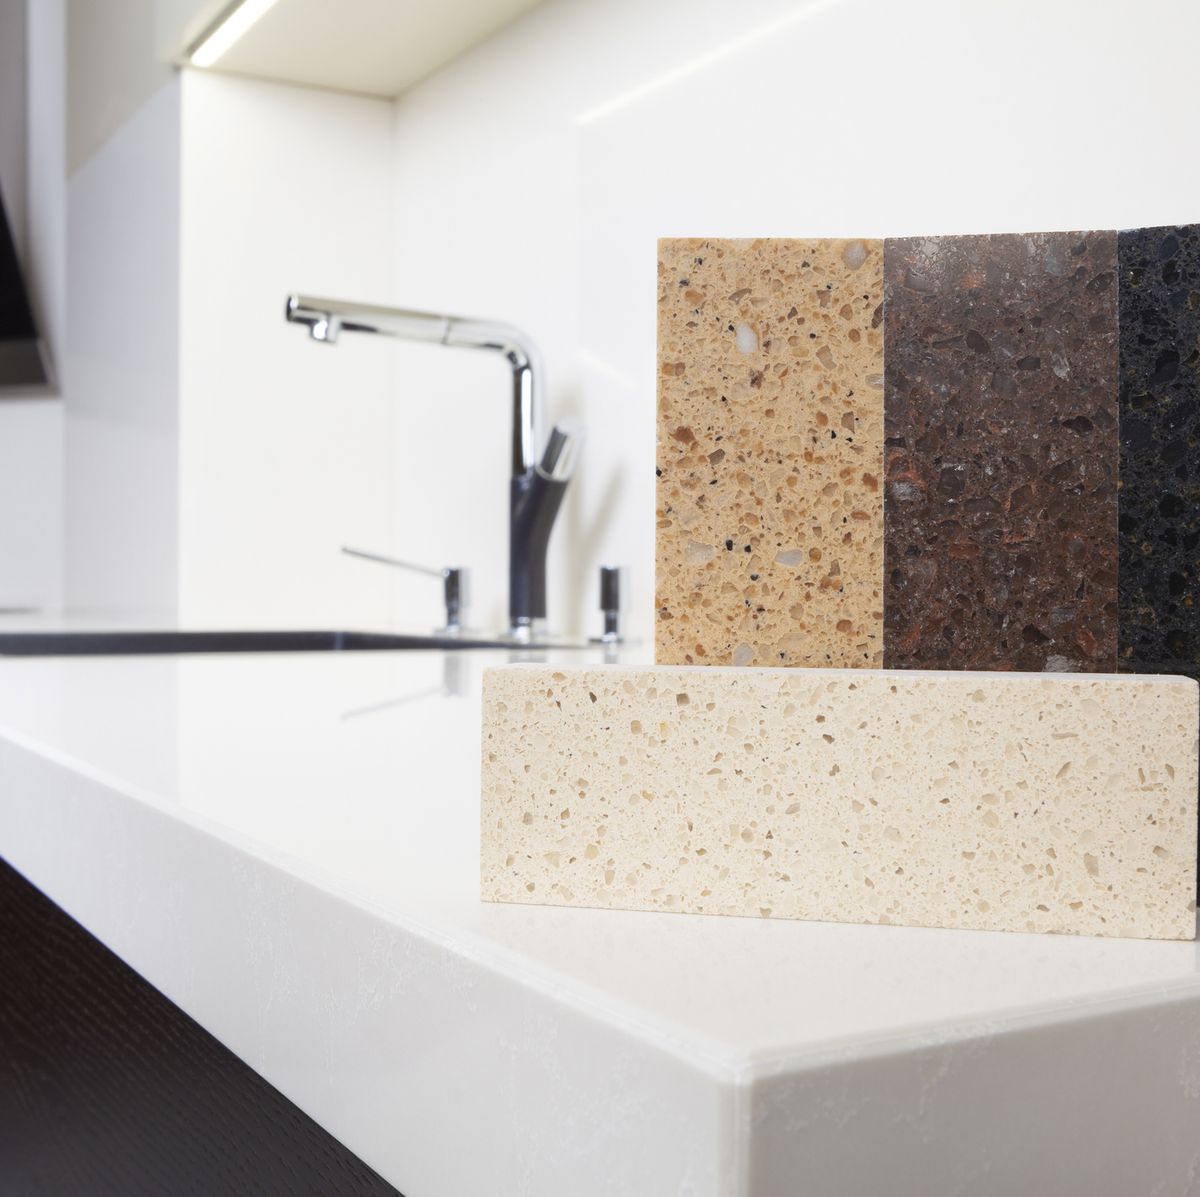 When it Comes To Countertop Design Raised, Bars Are A Thing Of The